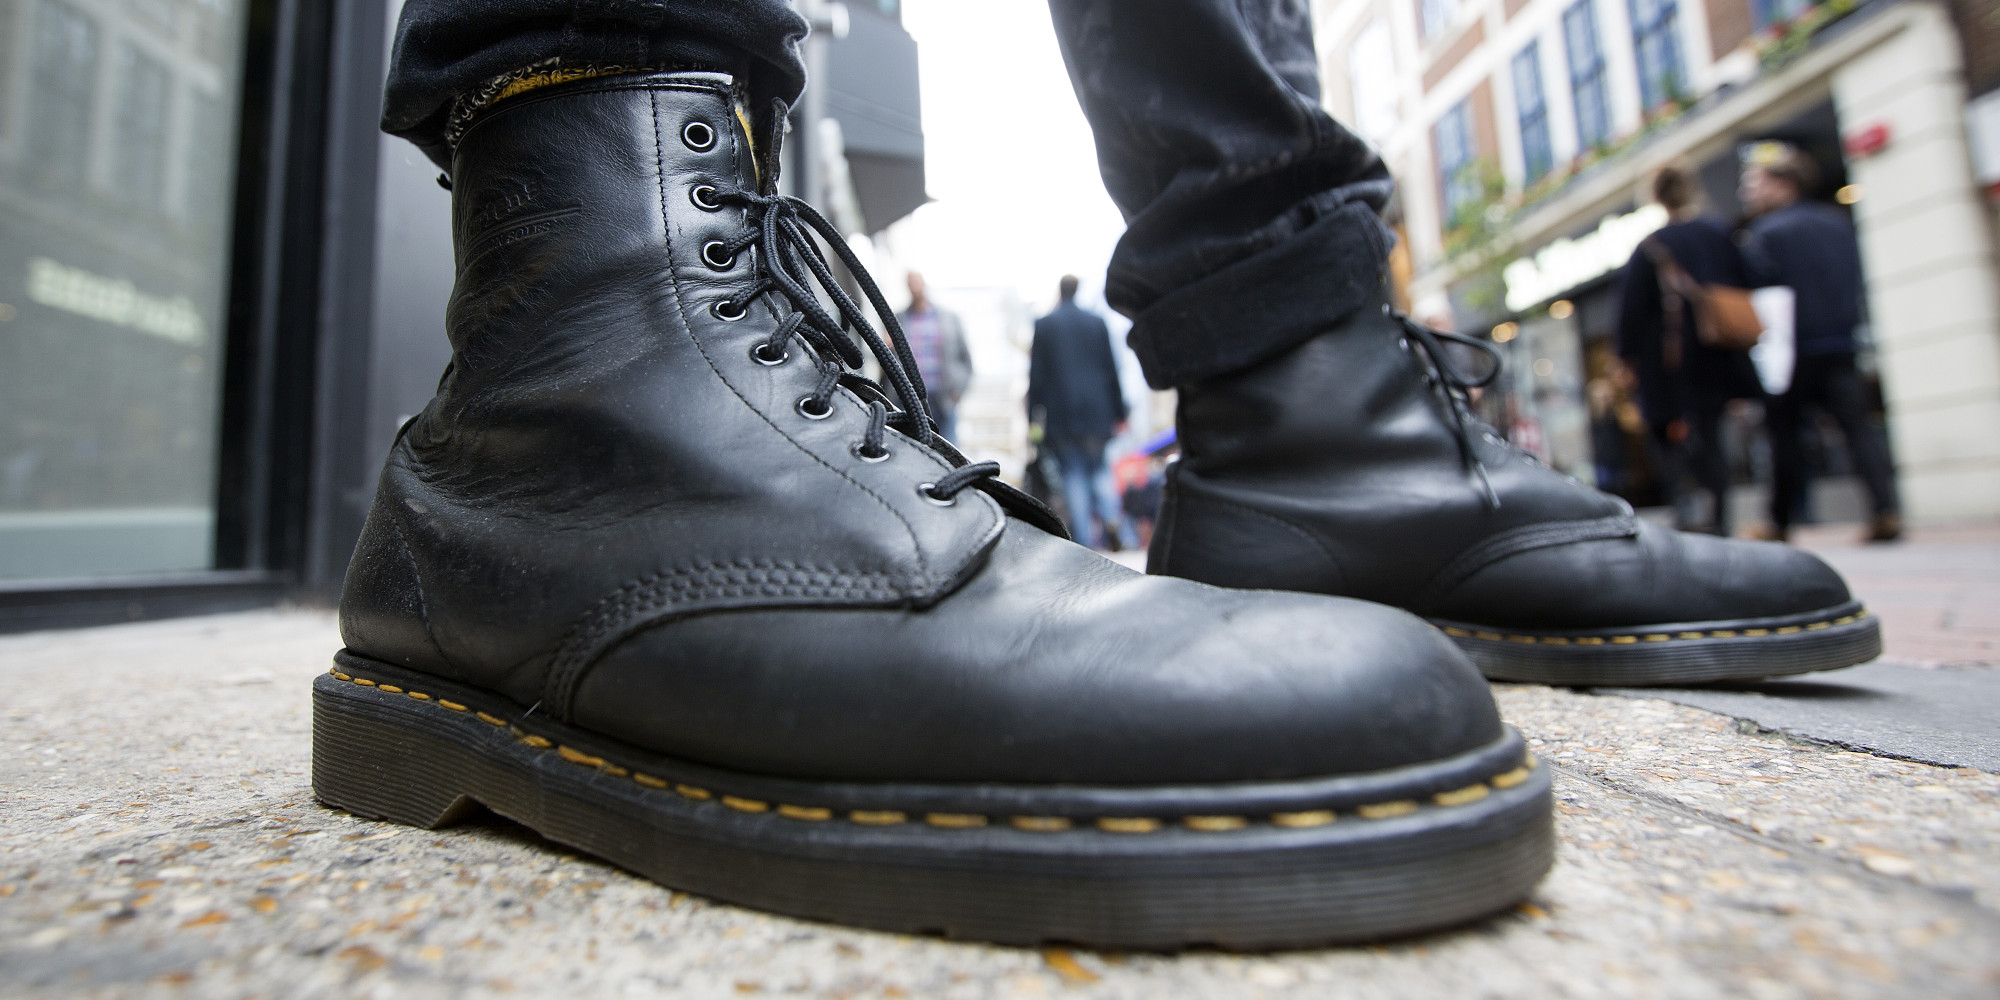 Dr Martens Sold Iconic Punk Boot Maker Bought By Investors